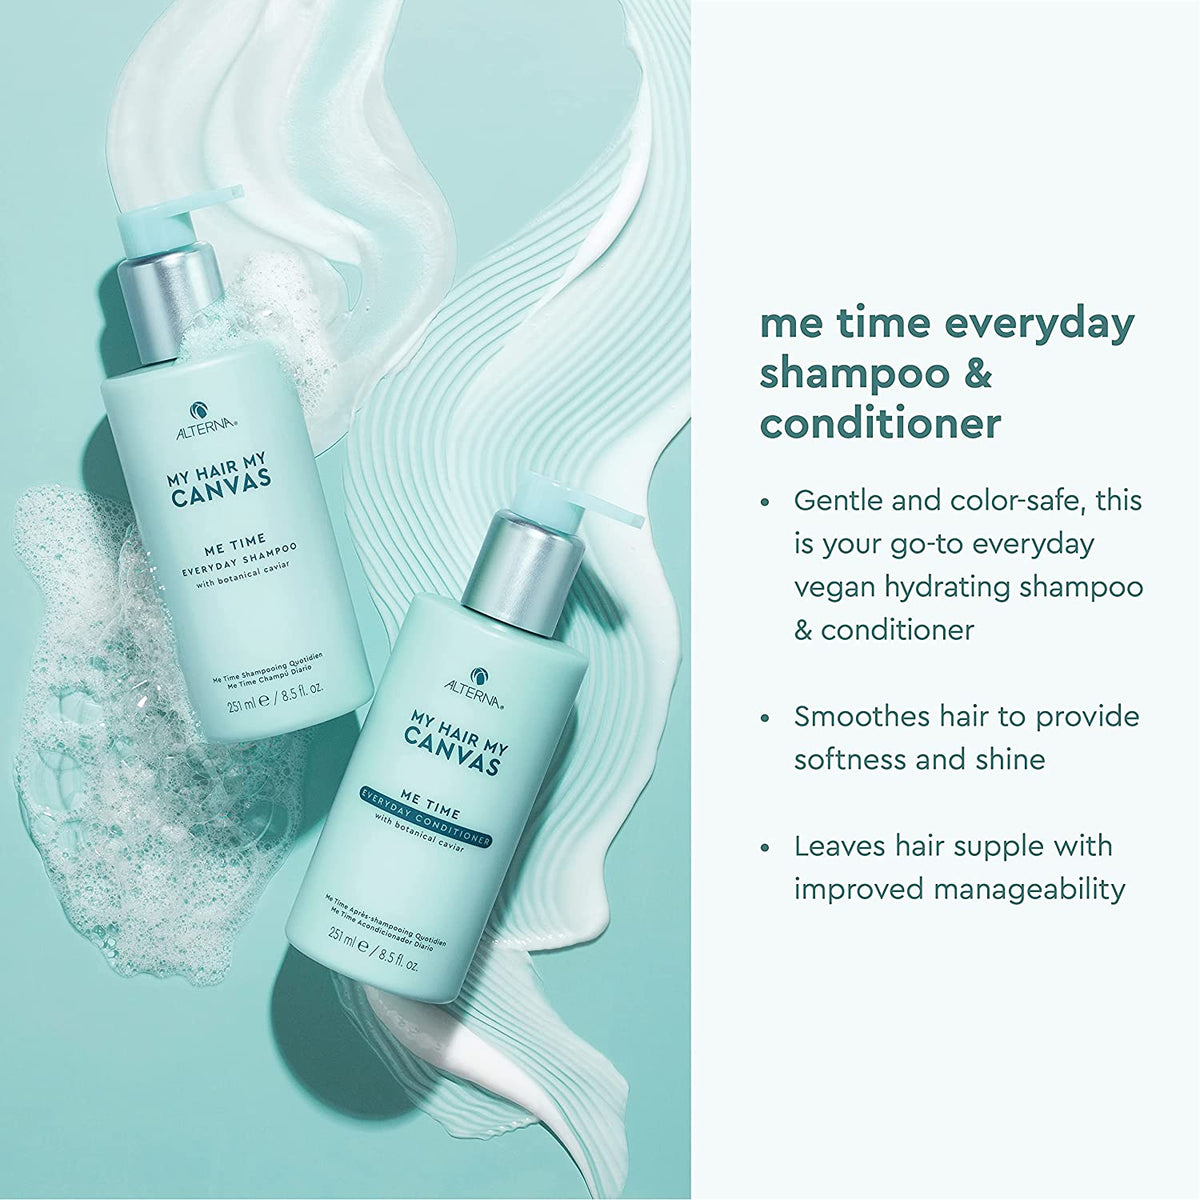 MY HAIR. MY CANVAS. ME TIME Everyday Conditioner